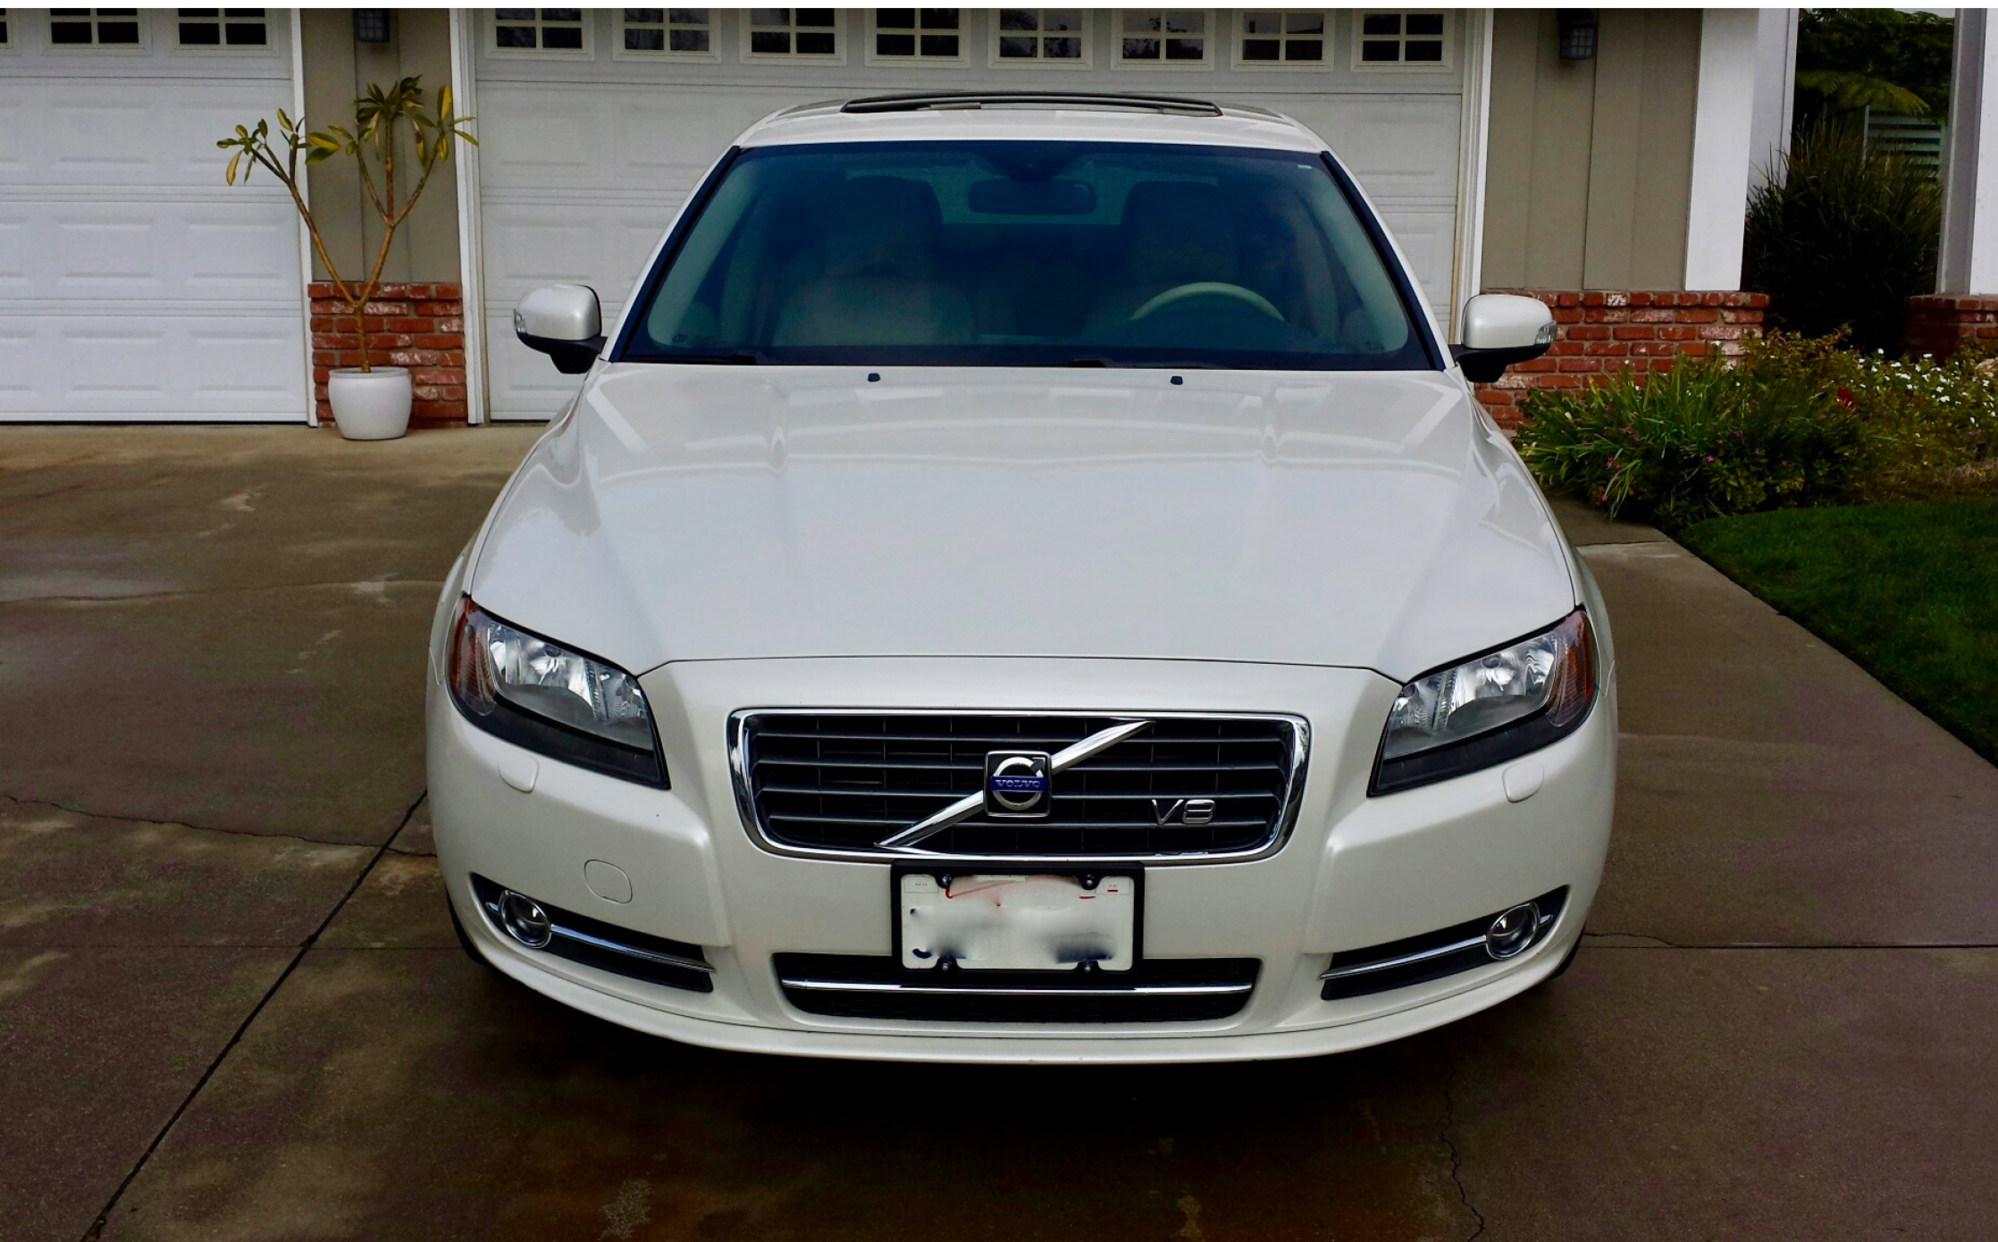 New Volvo S80 T6 project keep or sale? Volvo Forums